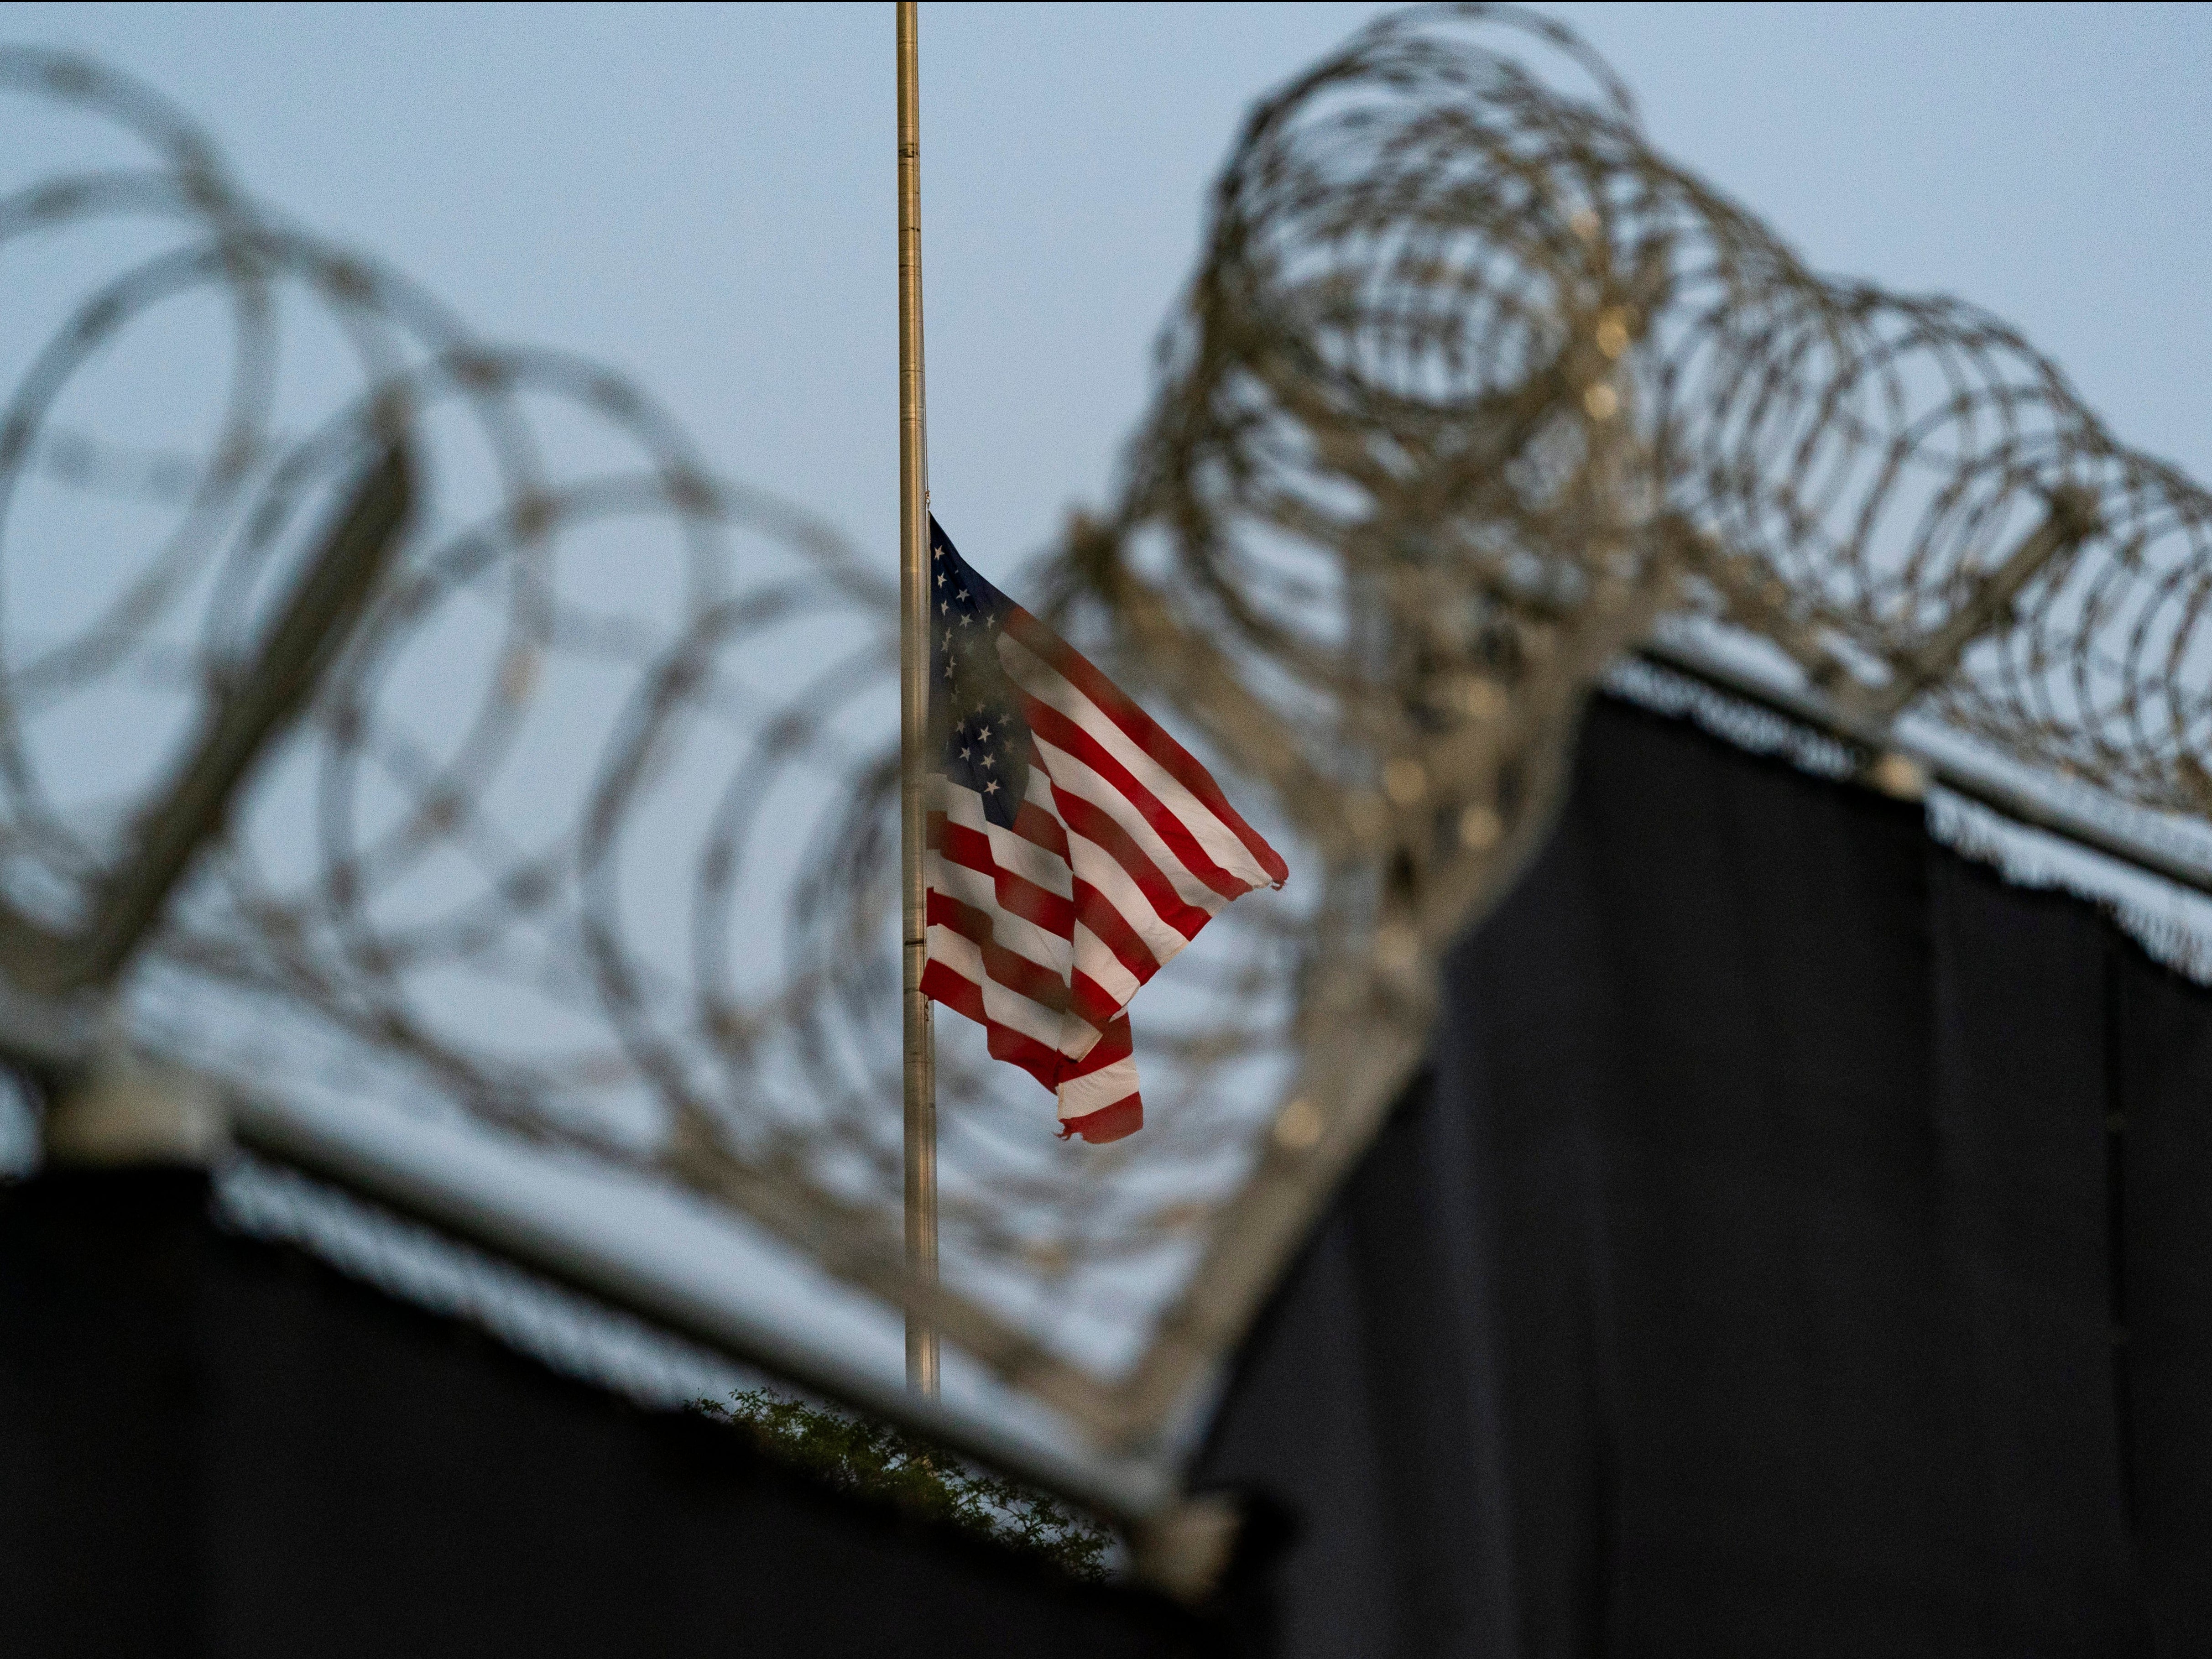 A flag flying at half mast at Guantanamo Bay’s Camp Justice mast for the victims of a terror attack in Kabul